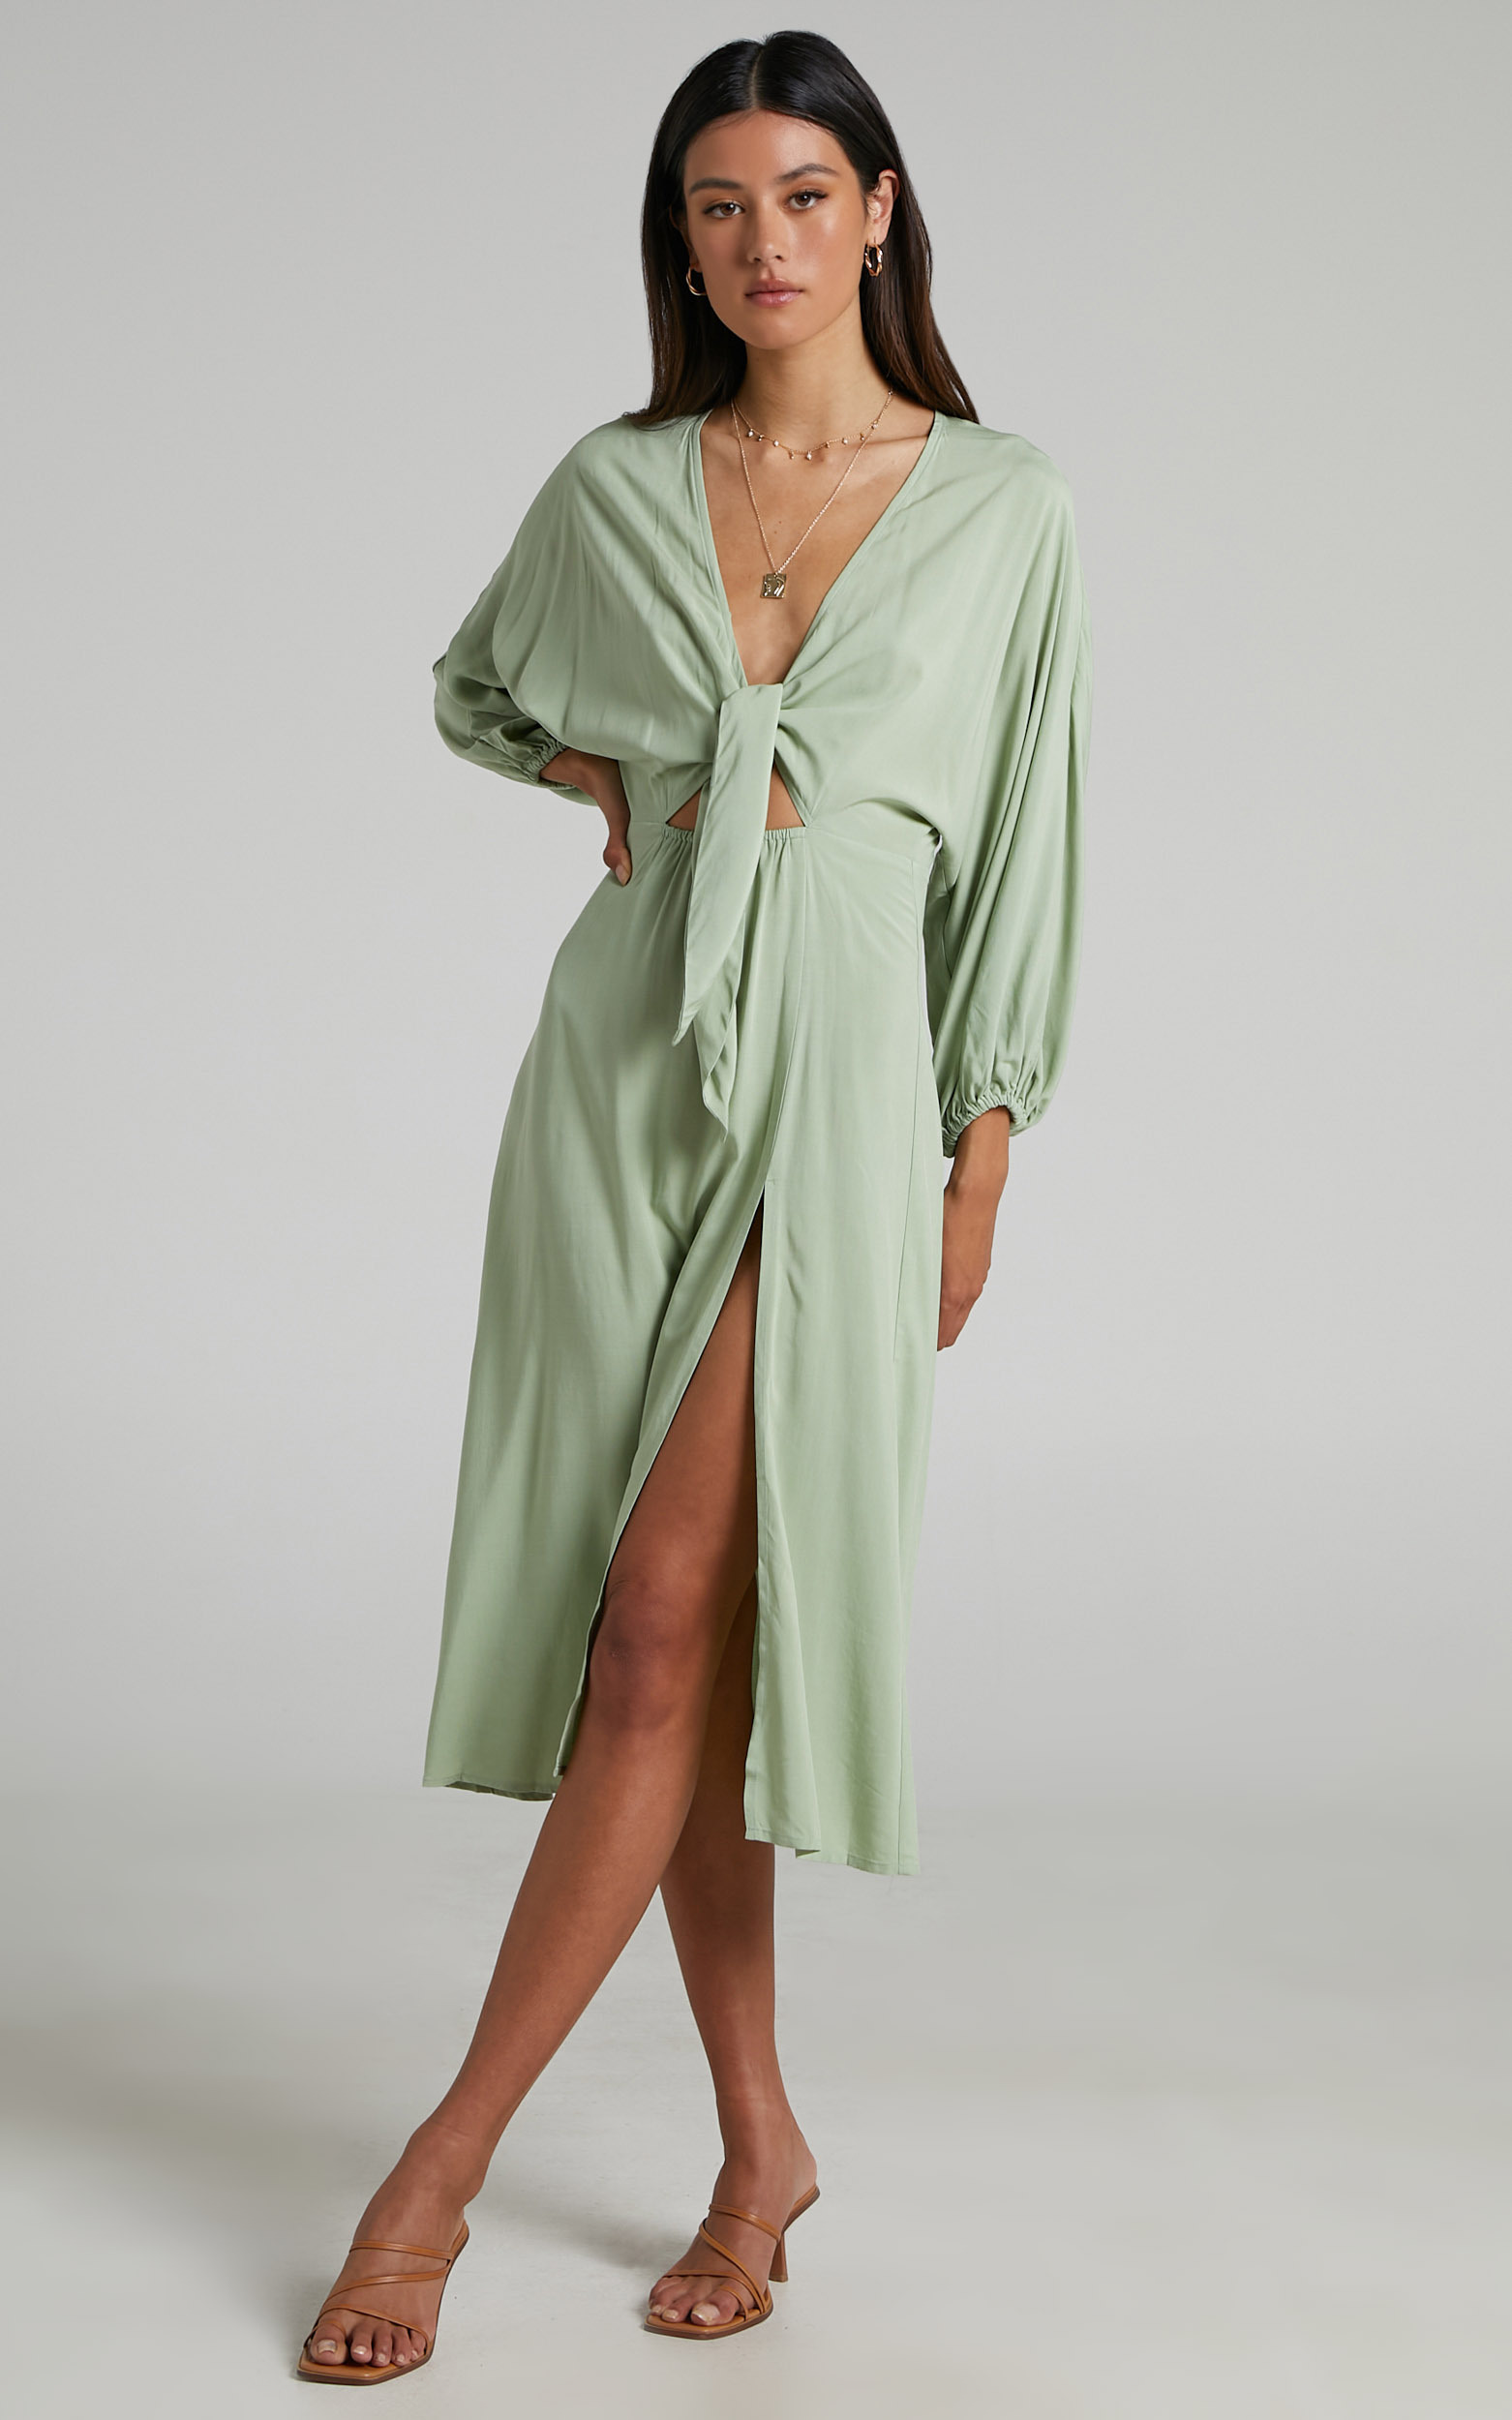 Tyricia Long Sleeve Tie Front Cut Out Midi Dress in Sage - 04, GRN1, hi-res image number null